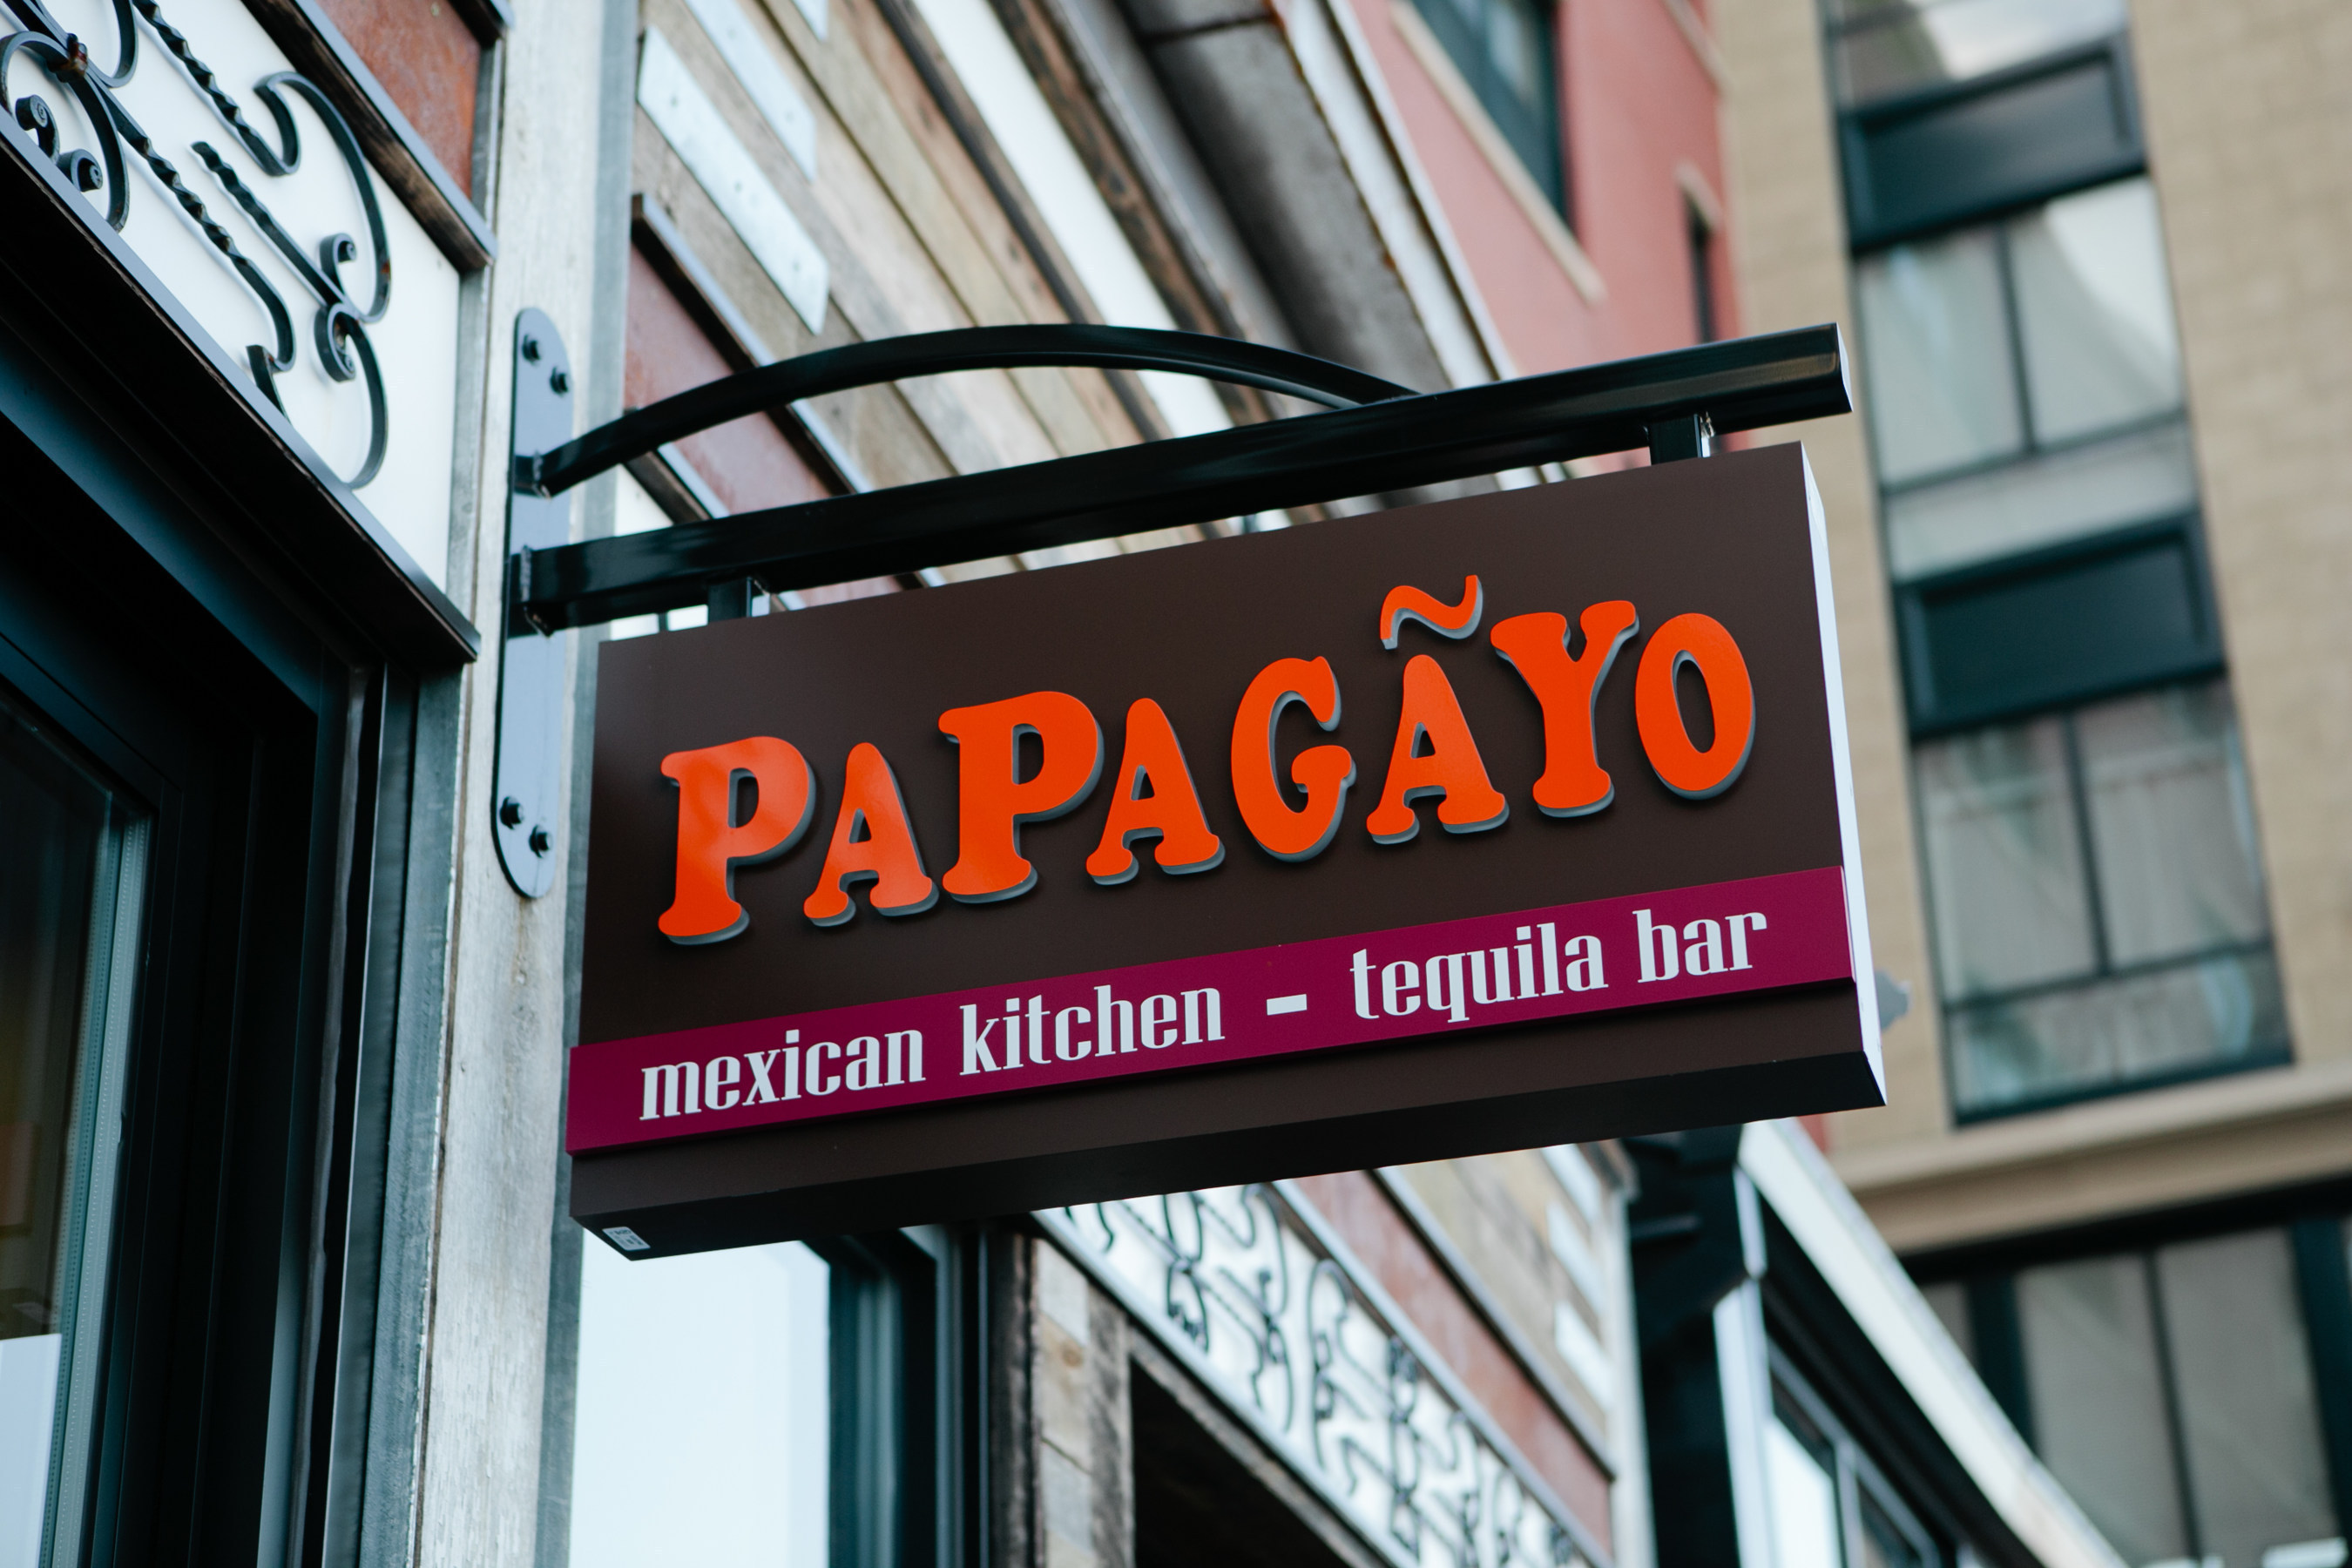 Papagayo Restaurants in Boston, MA are offering free food if the New England Patriots win the big game.